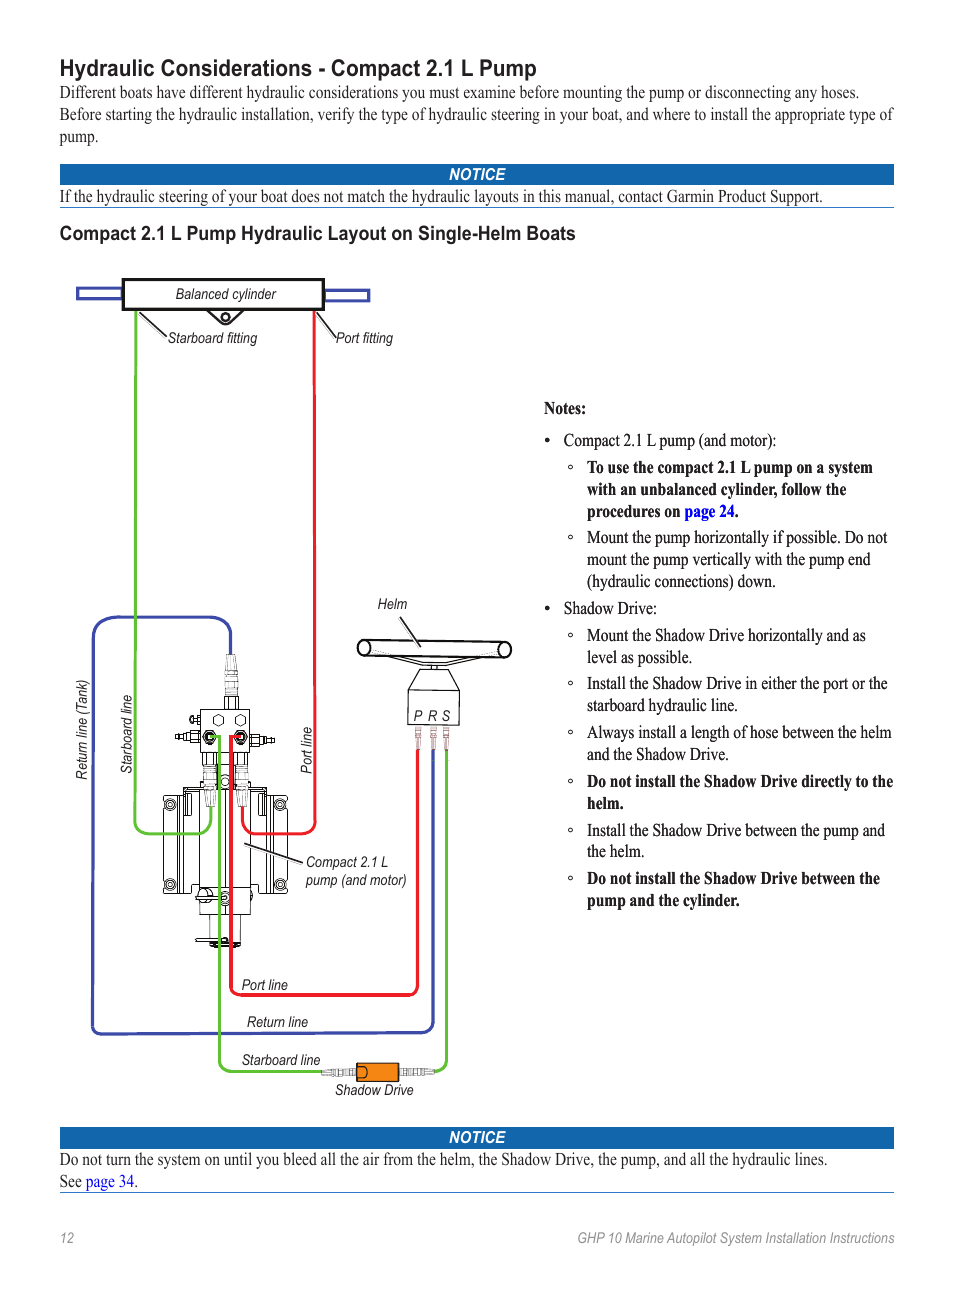 syreindhold Terminal lettelse Hydraulic considerations - compact 2.1 l pump | Garmin GHP 10 User Manual |  Page 12 / 48 | Original mode